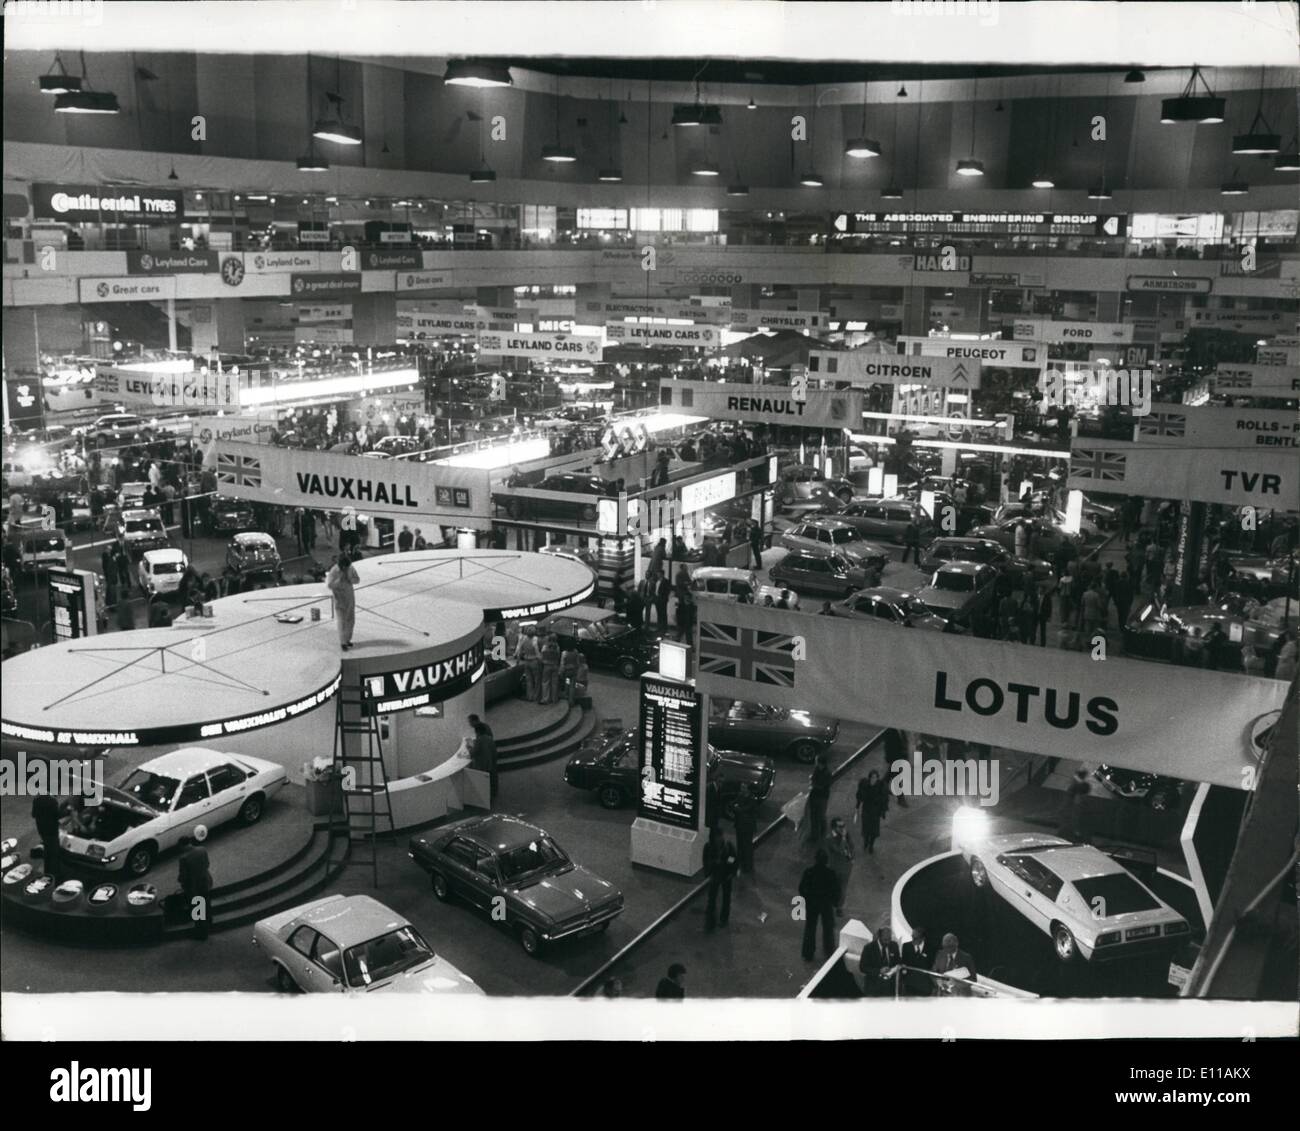 Oct. 10, 1976 - A Preview Of The International Motor Show Which Opens At Earls Court Tomorrow. Photo Shows: A general view of some of the cars which will be on show to the public at Earls Court tomorrow. Stock Photo